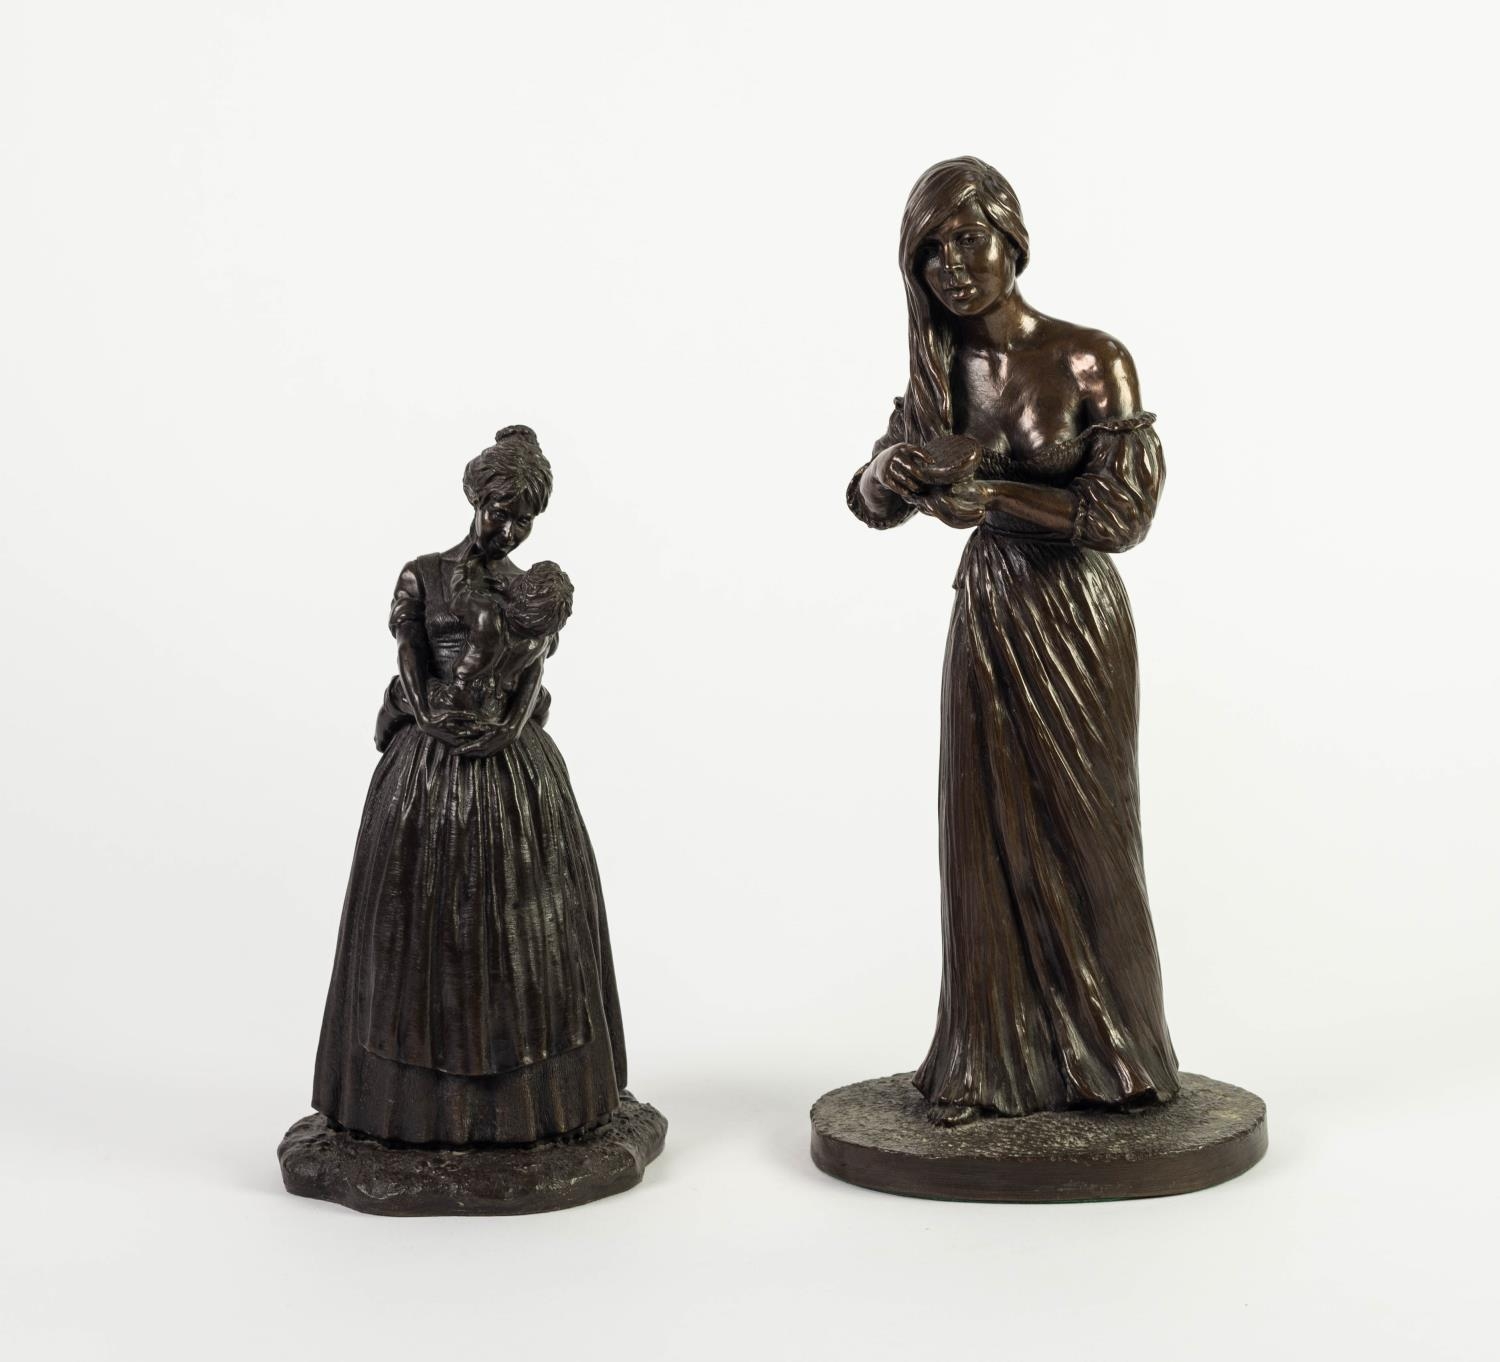 TWO BRONZED RESIN SCULPTURES JEANNE RYNHART (1946-2020) Modelled as a woman combing her hair 12? (